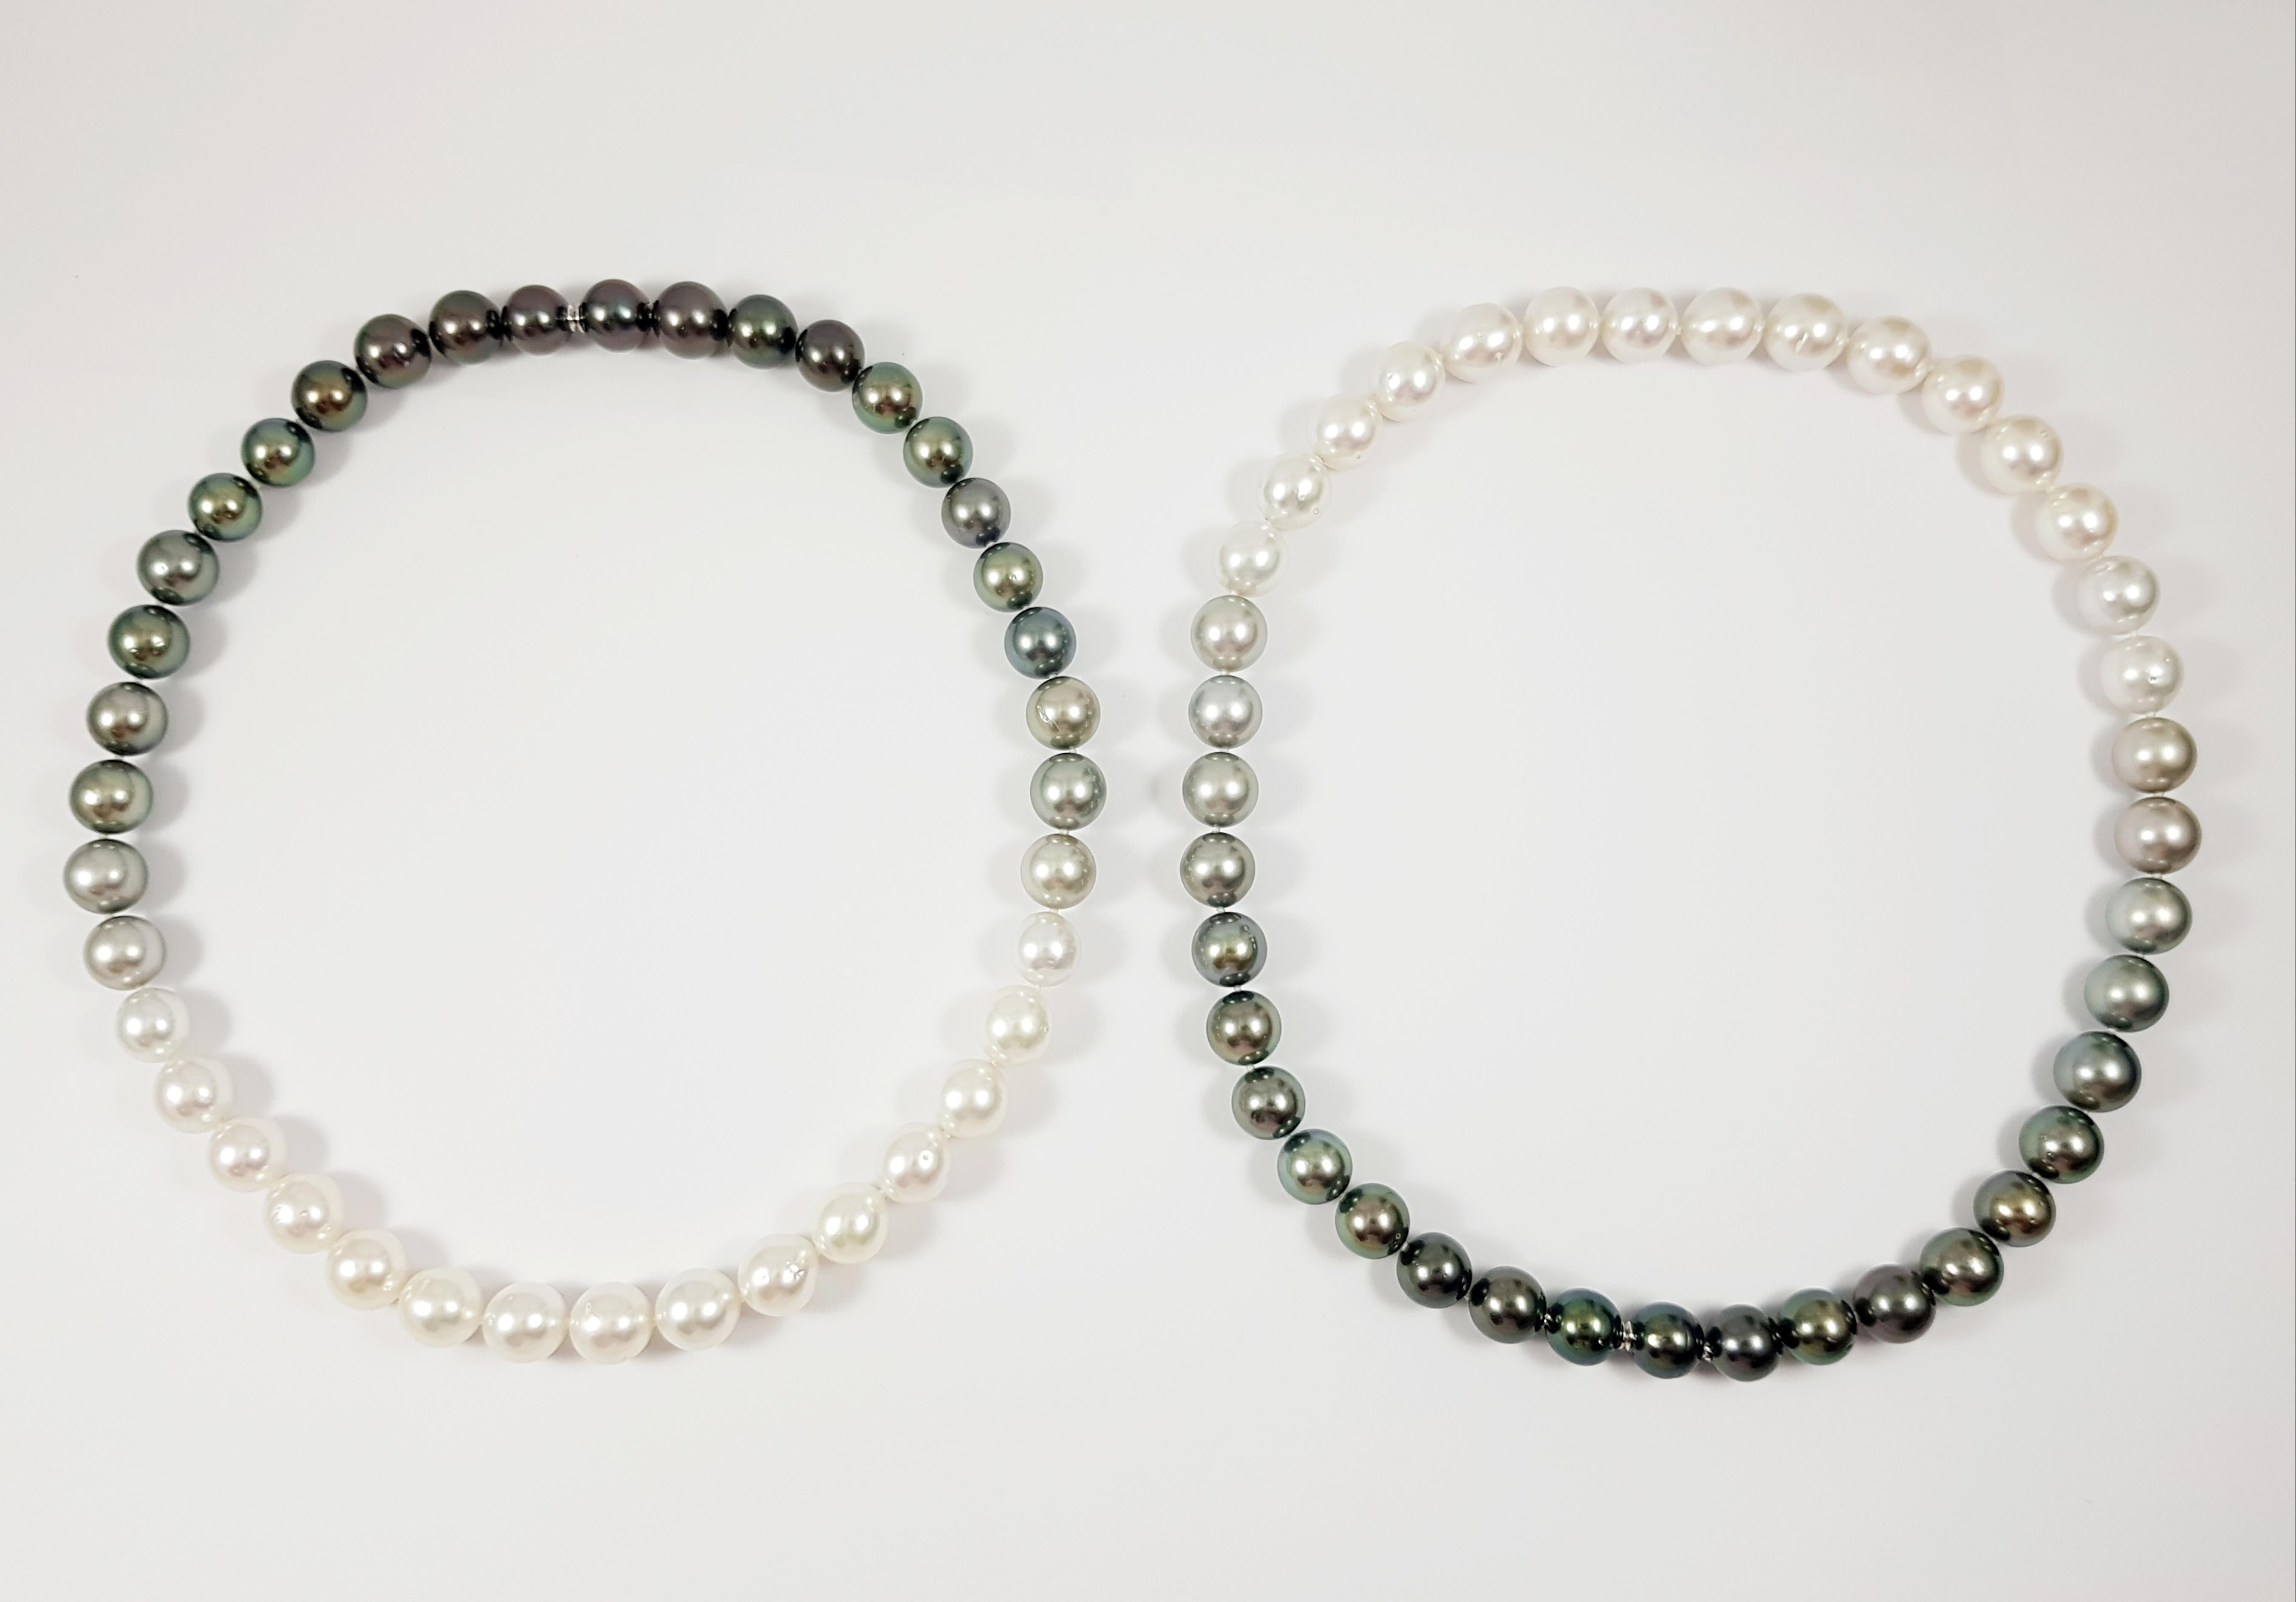 Gradutated Color South Sea Pearl Necklace with Hidden 18K White Gold Clasp 
The two strands can be worn as individual necklaces or combined into a long necklace.  Additionally, each necklace offers graduated color from black pearl to white pearl,